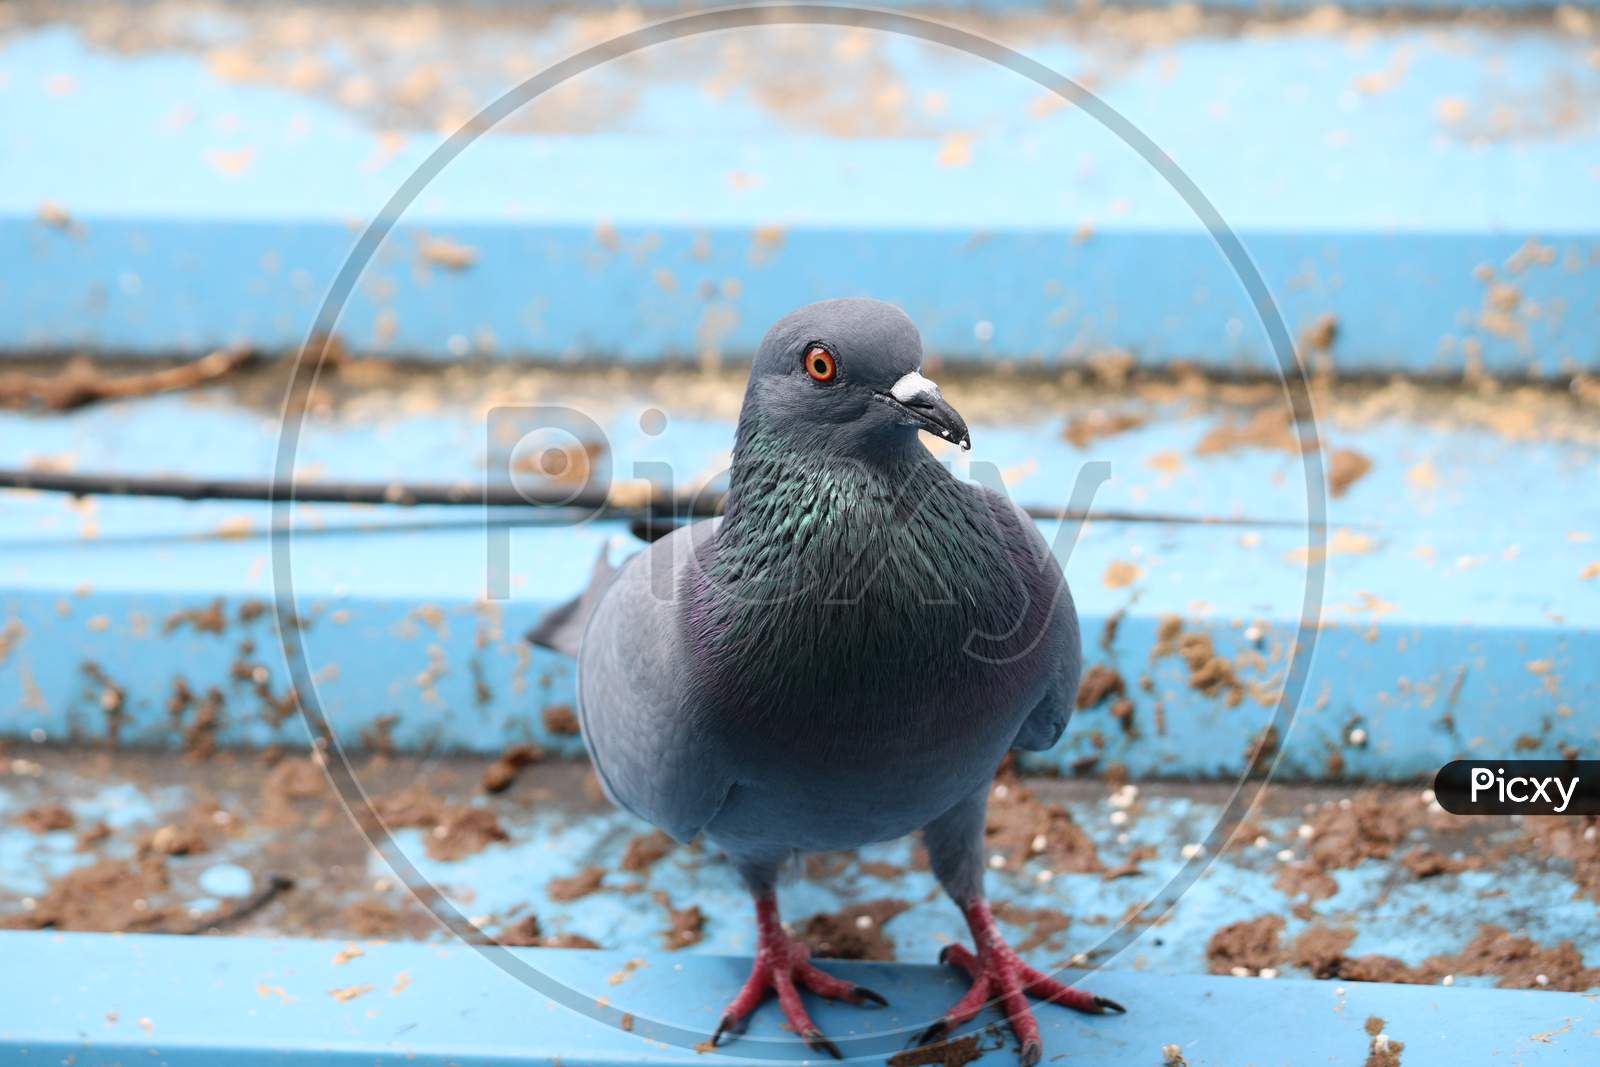 Pigeon searching for food